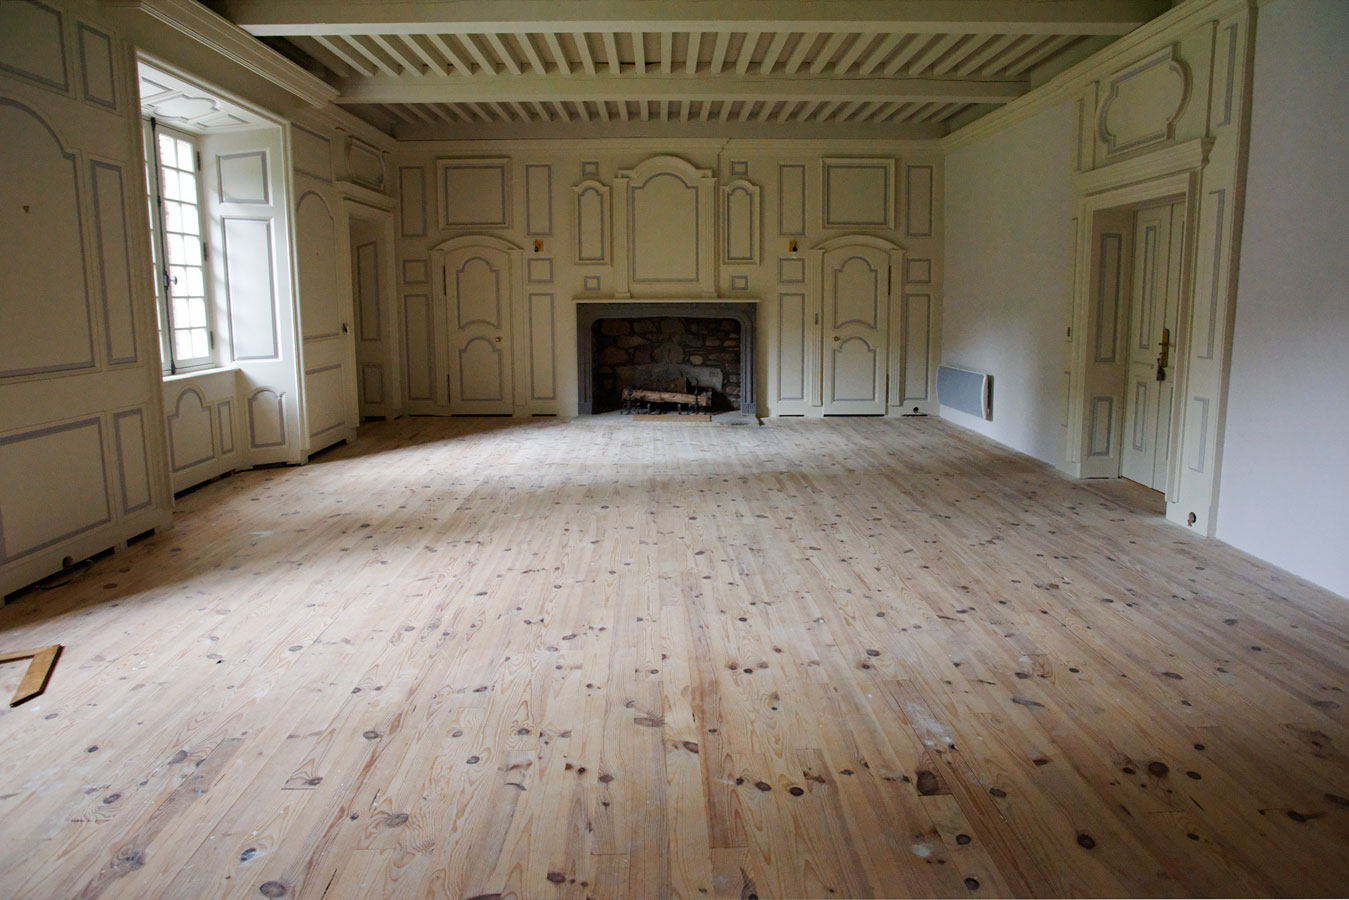 Great room of the Castle